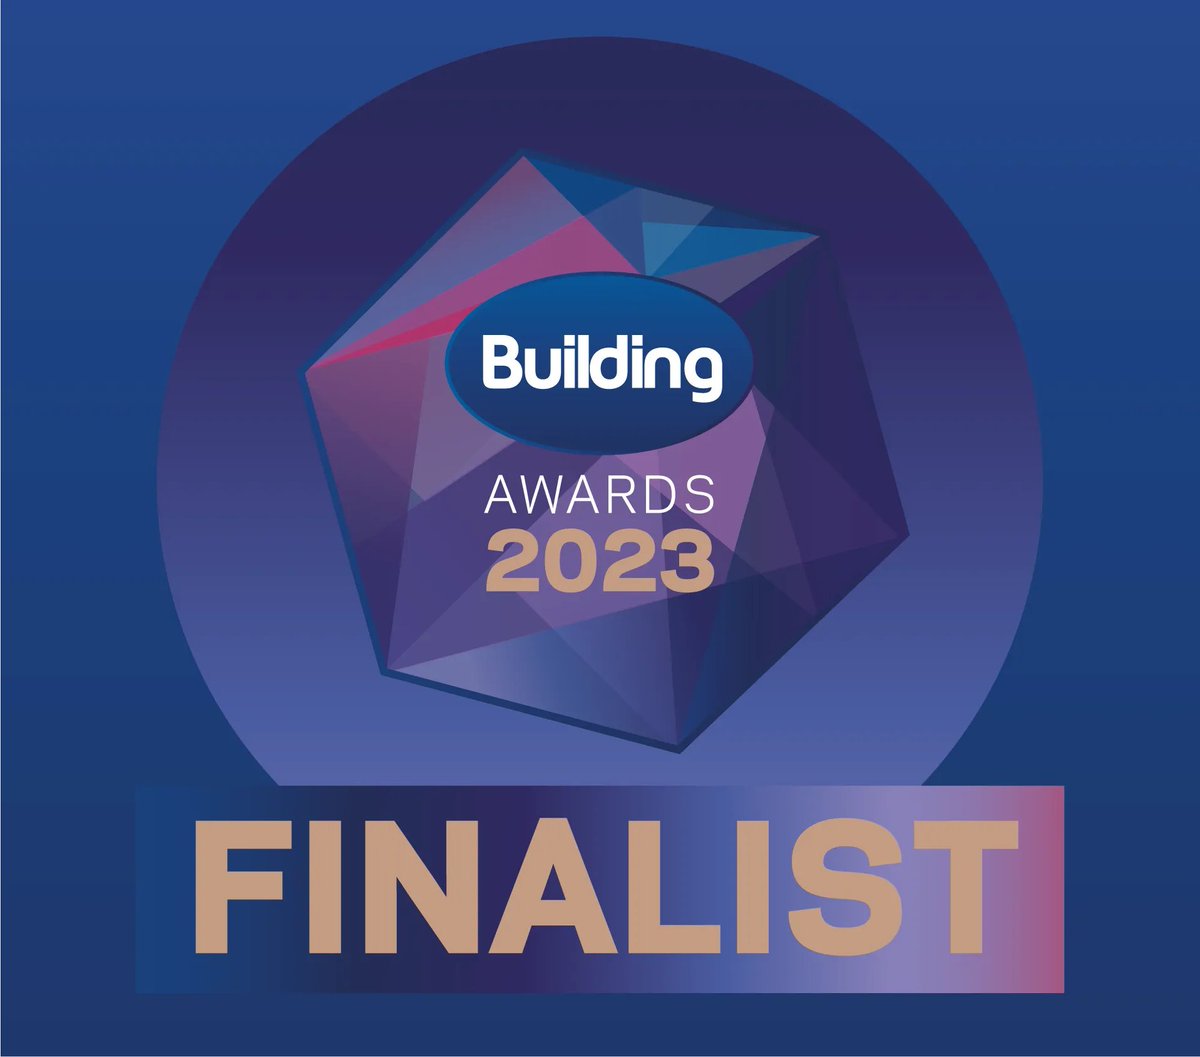 We are proud to be finalists in the Construction Consultant/Surveyor of the Year (over 100 staff) category in the Building Awards 2023. @buildingawards @buildingnews #buildingawards2023 #awards #builtenvironment #consultantoftheyear #construction